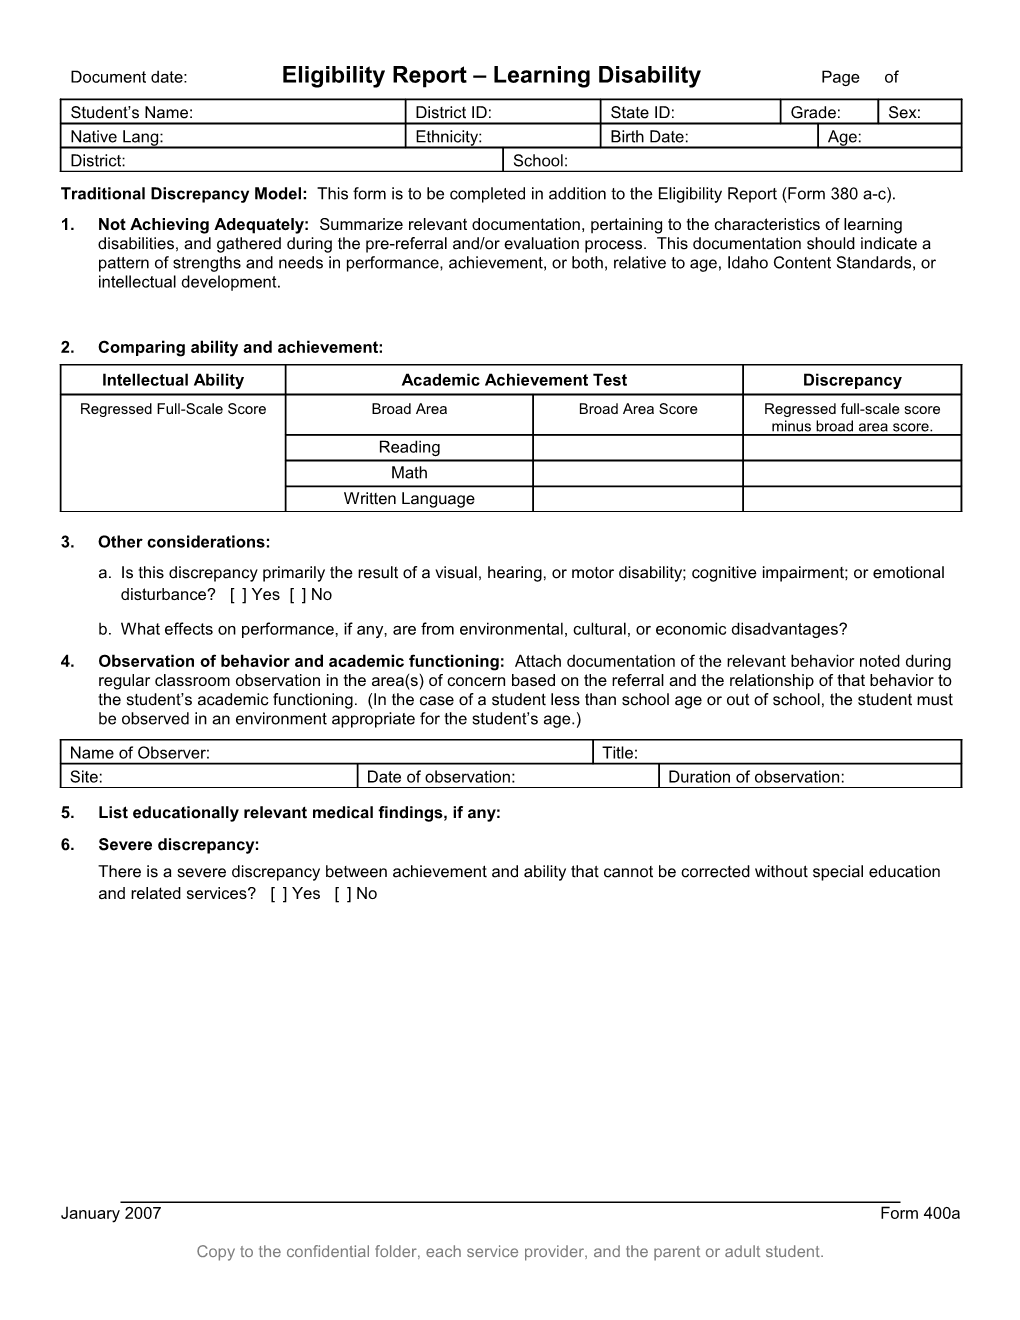 Traditional Discrepancy Model: This Form Is to Be Completed in Addition to the Eligibility